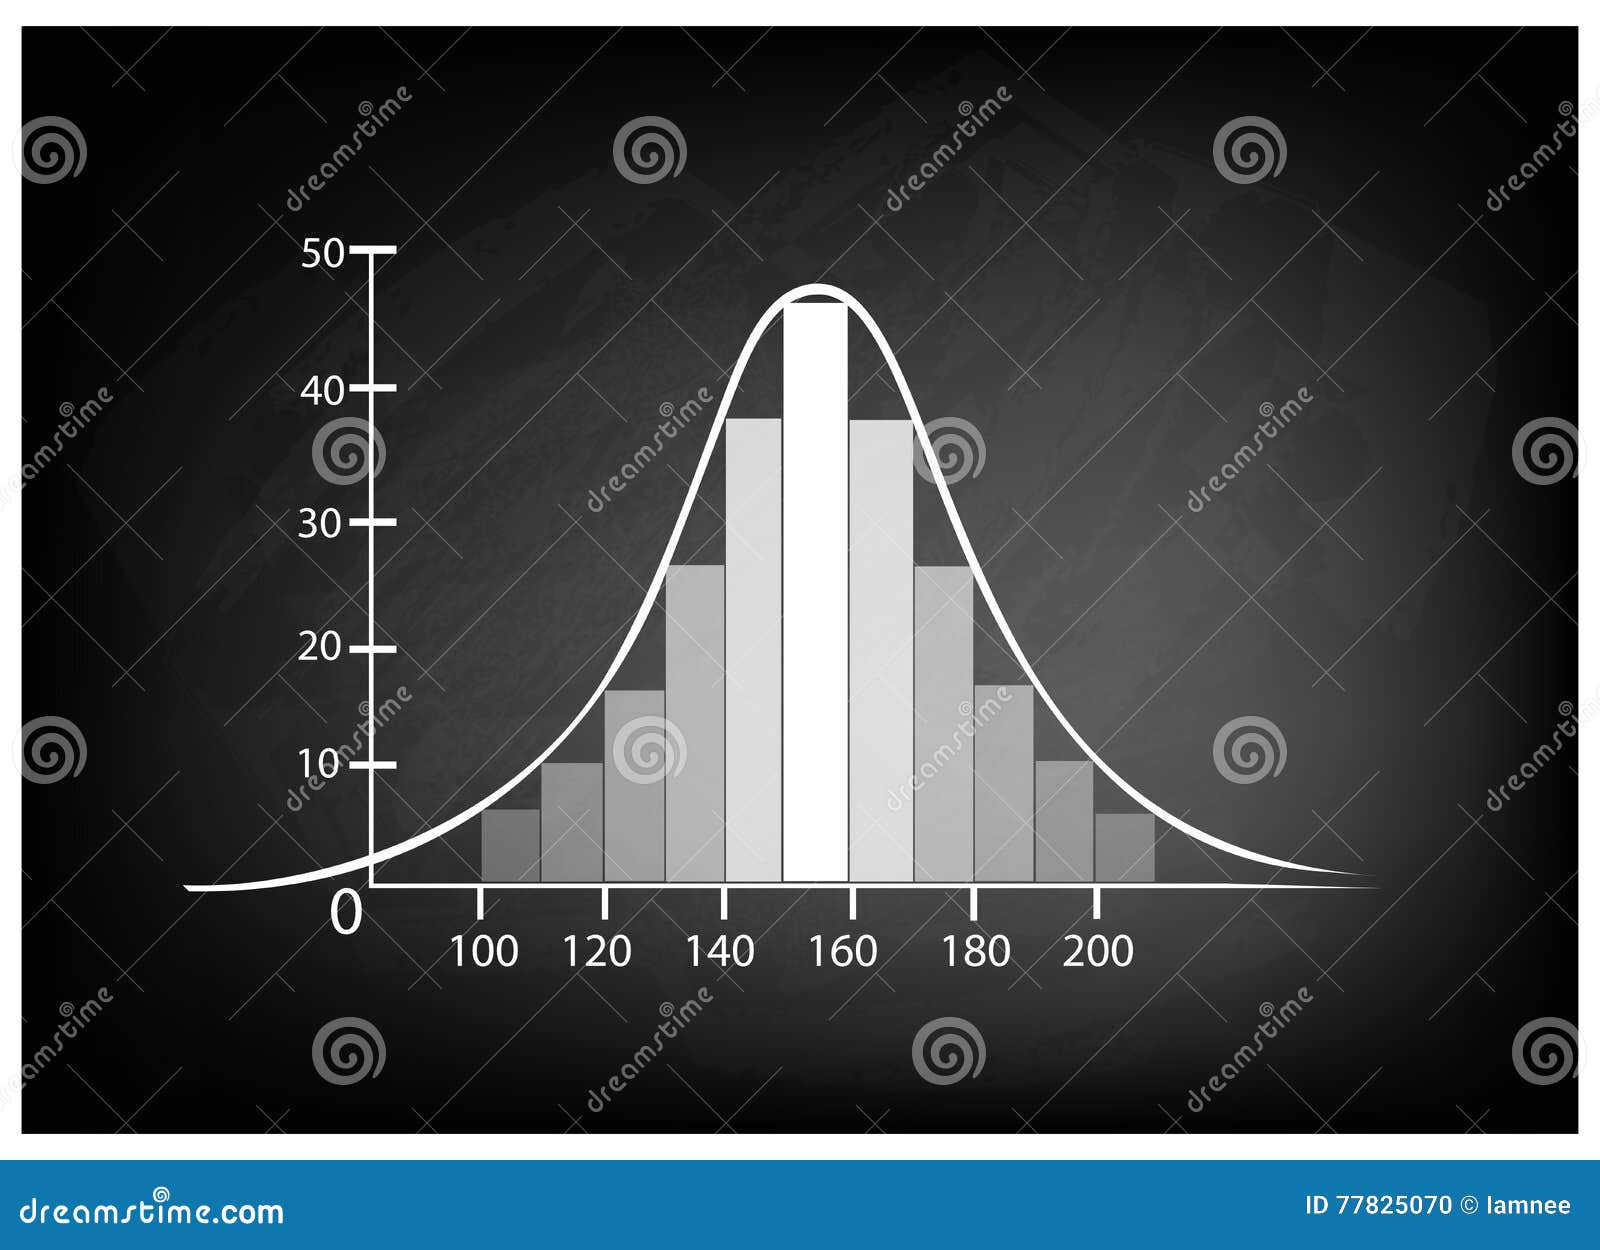 normal distribution chart or gaussian bell curve on chalkboard